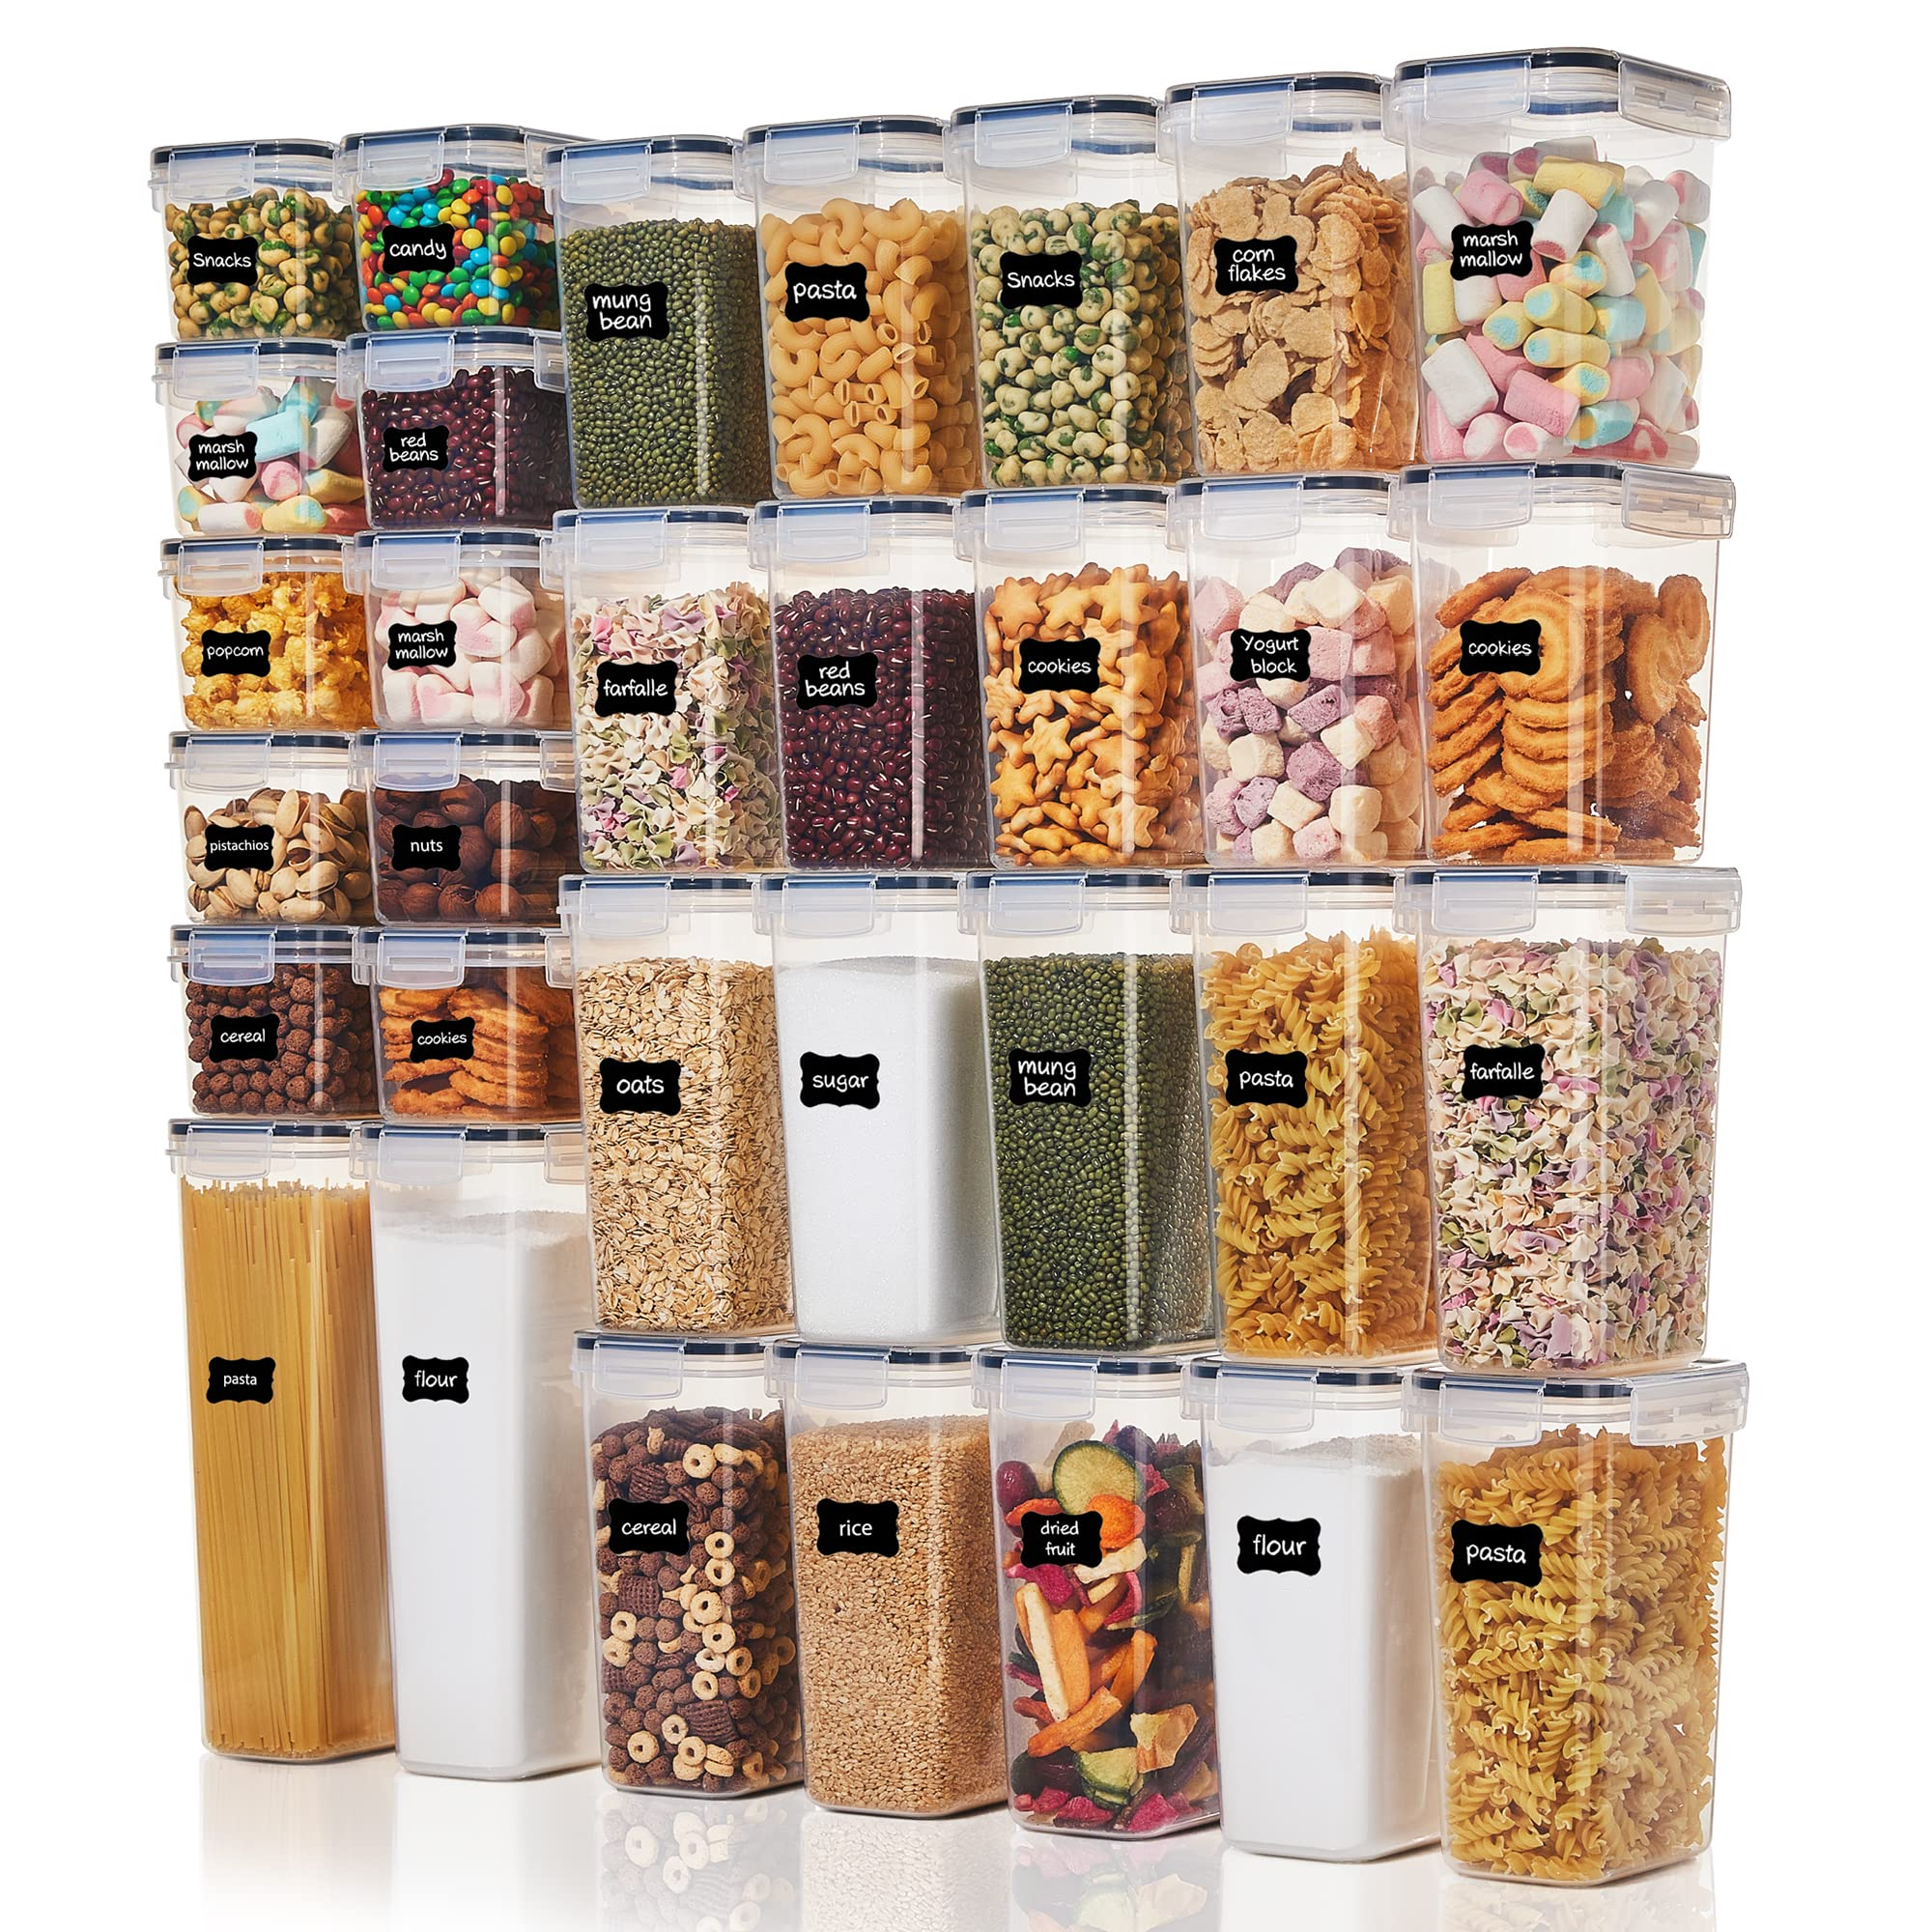 Vtopmart Cereal Storage Container Set, Extra Large BPA Free Plastic Ai